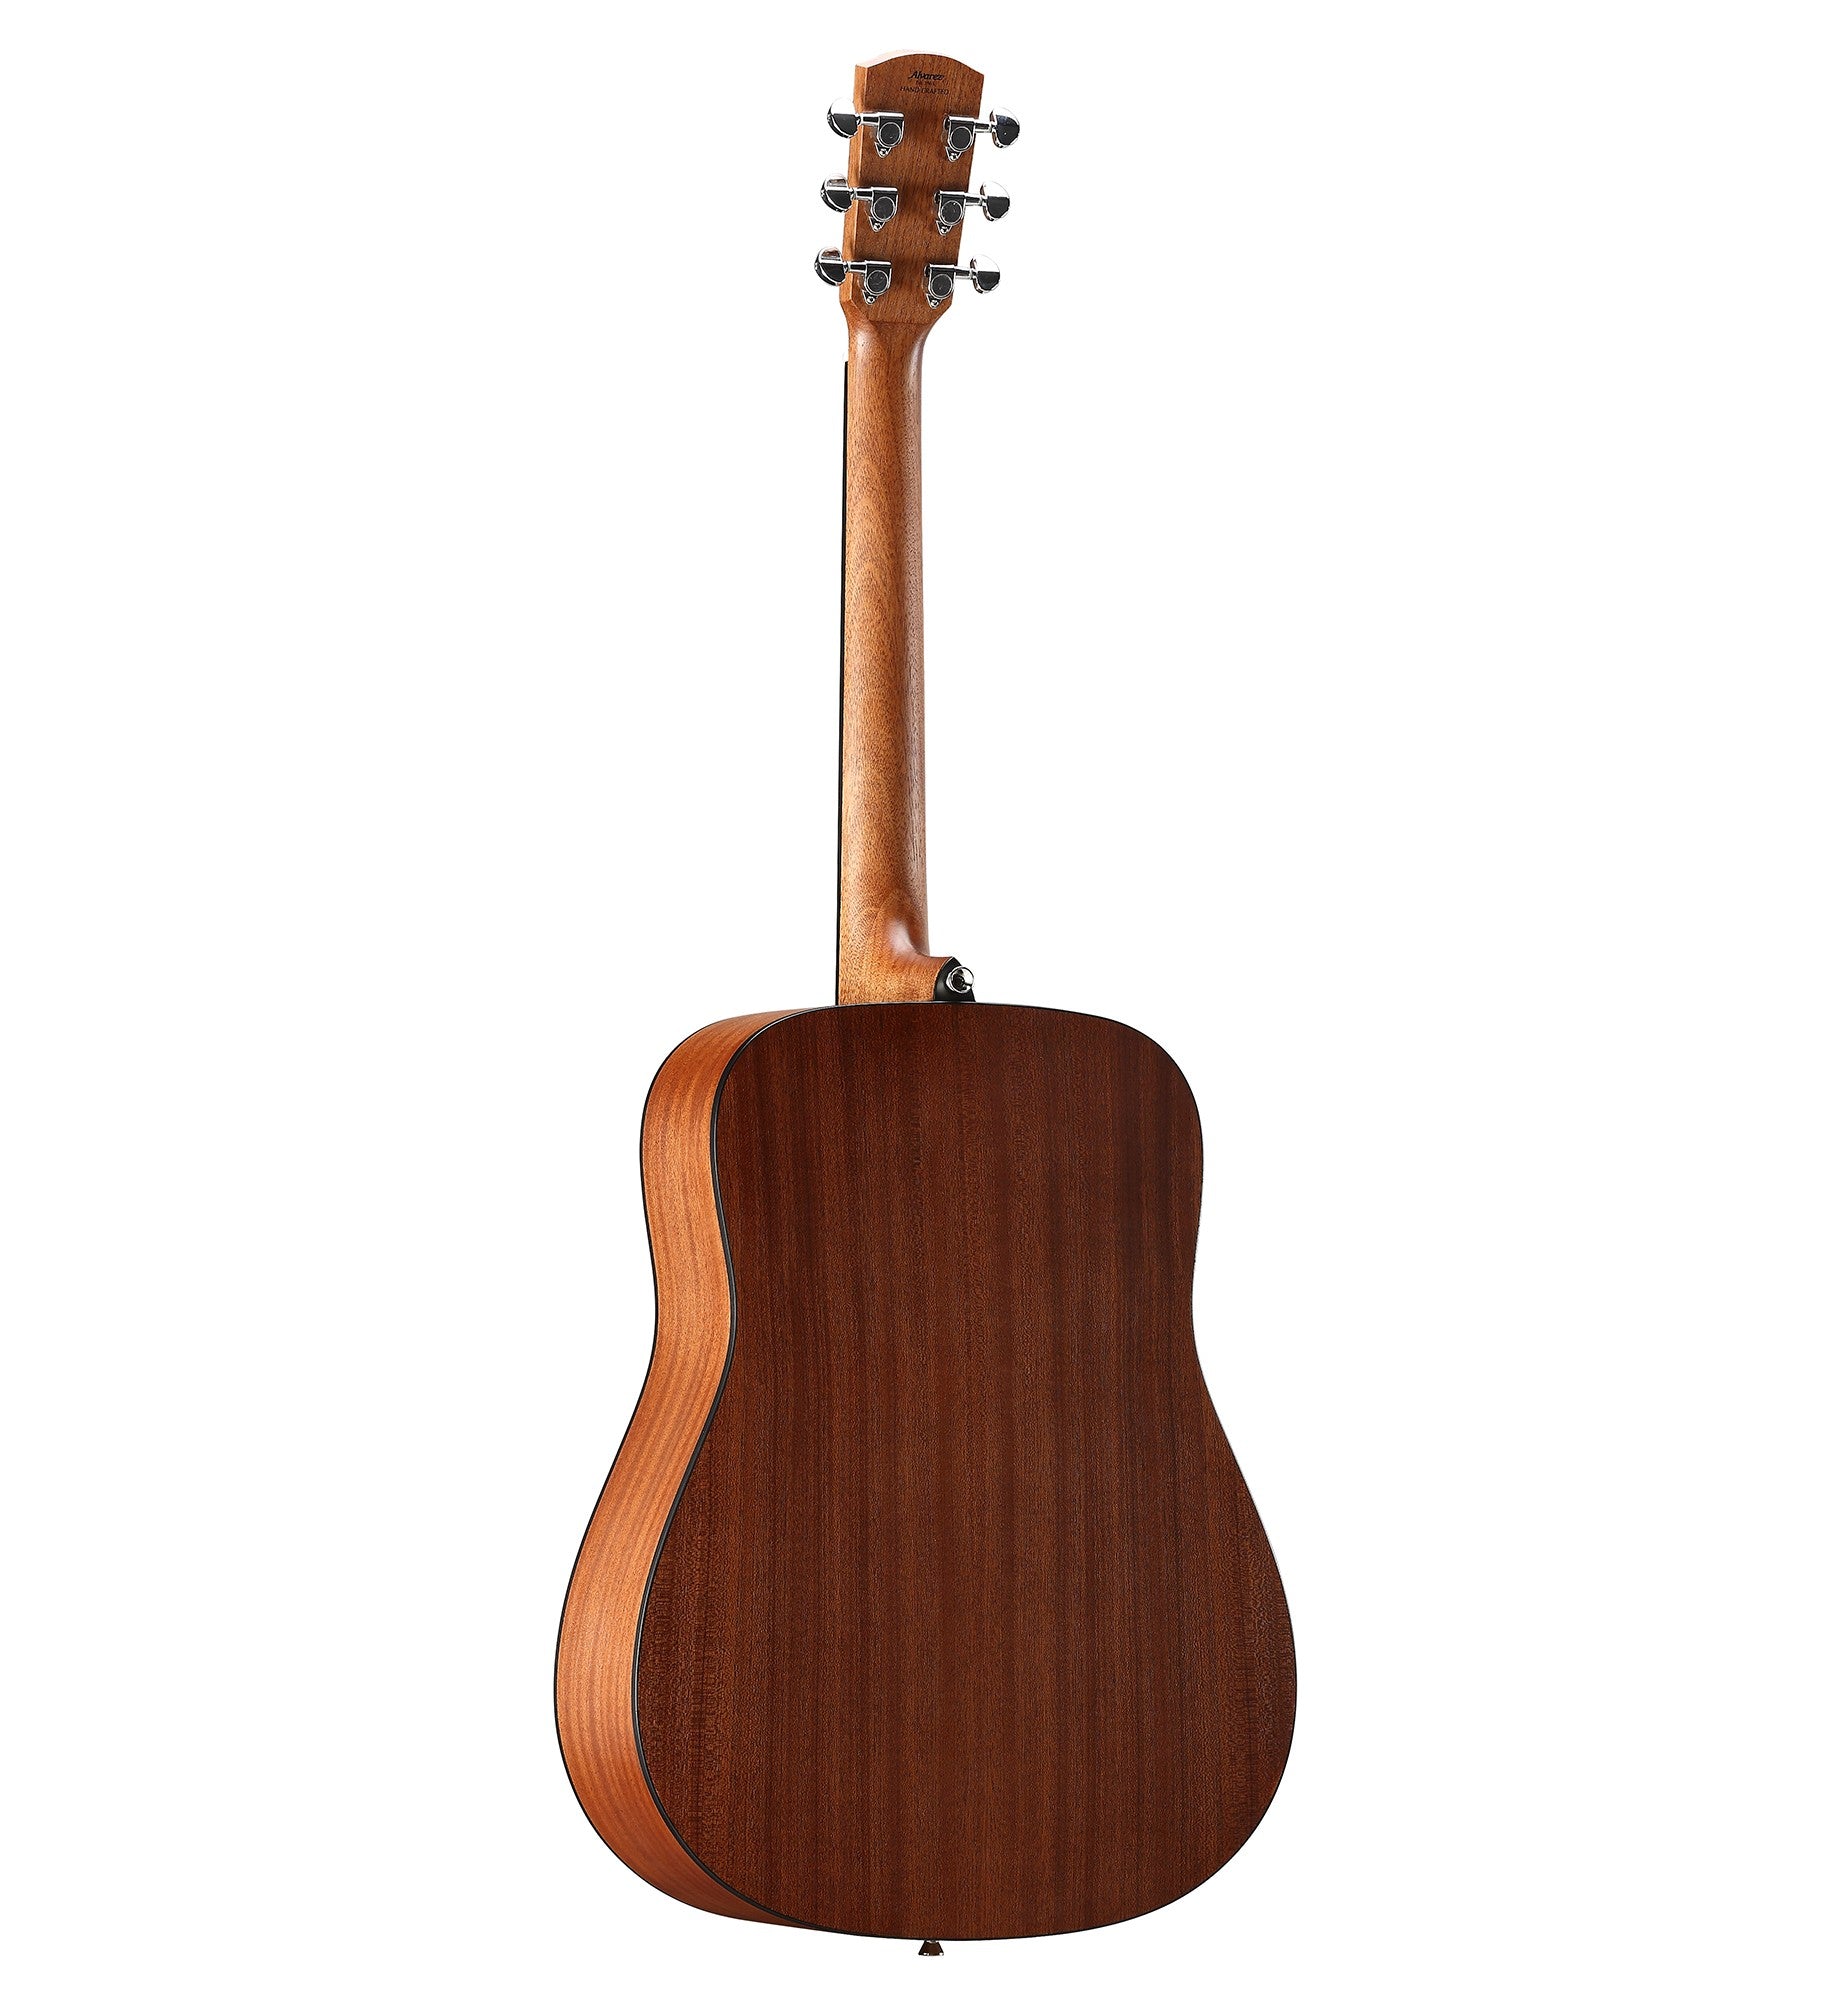 Alvarez AD30 Acoustic Dreadnought, Natural Satin, Solid A Sitka Spruce Top, Bone Nut And Saddle